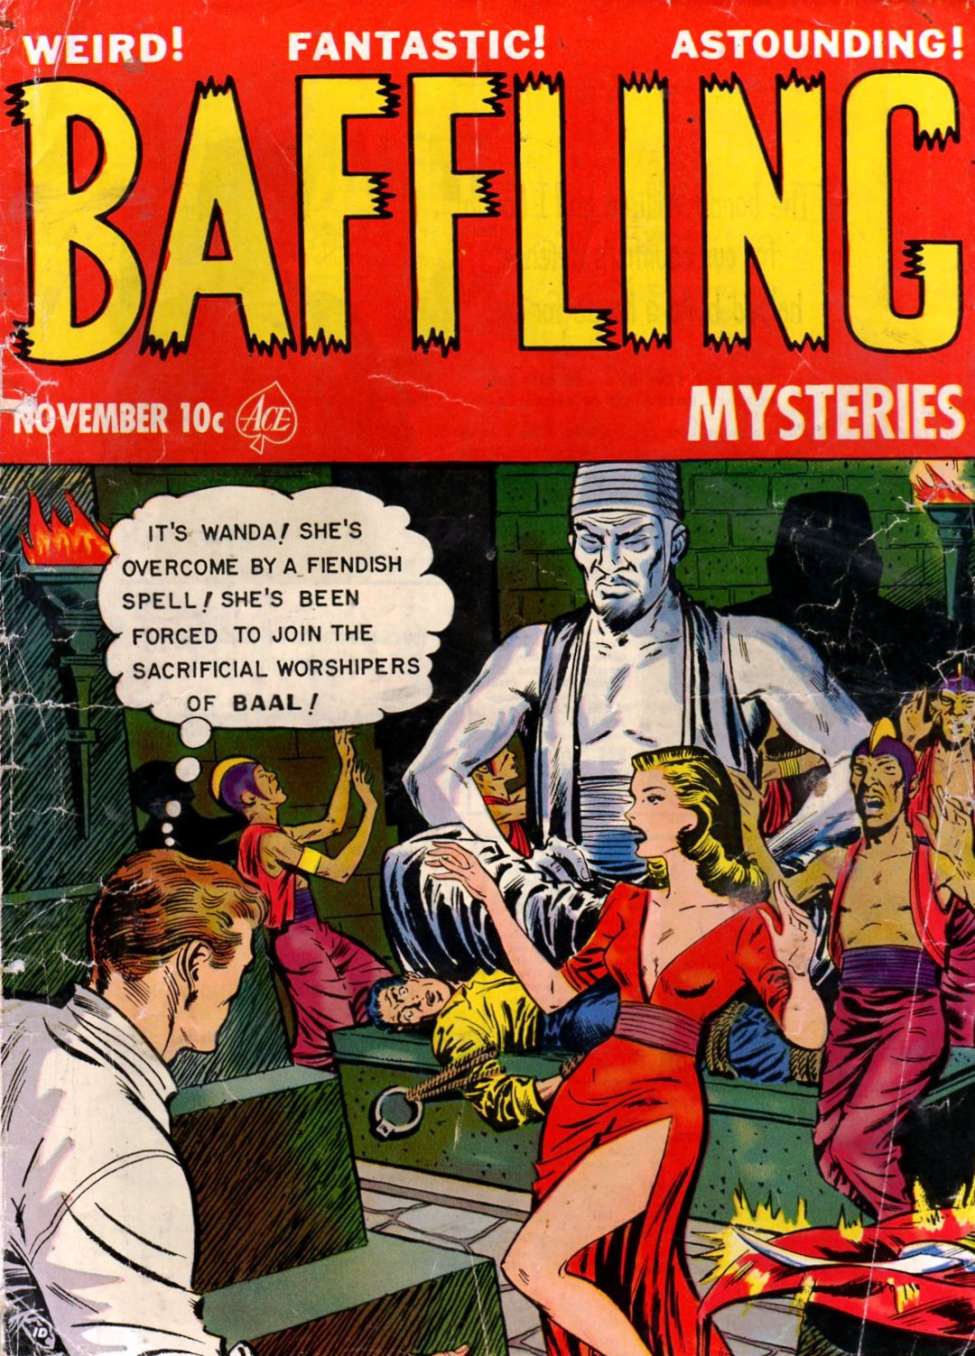 Book Cover For Baffling Mysteries 11